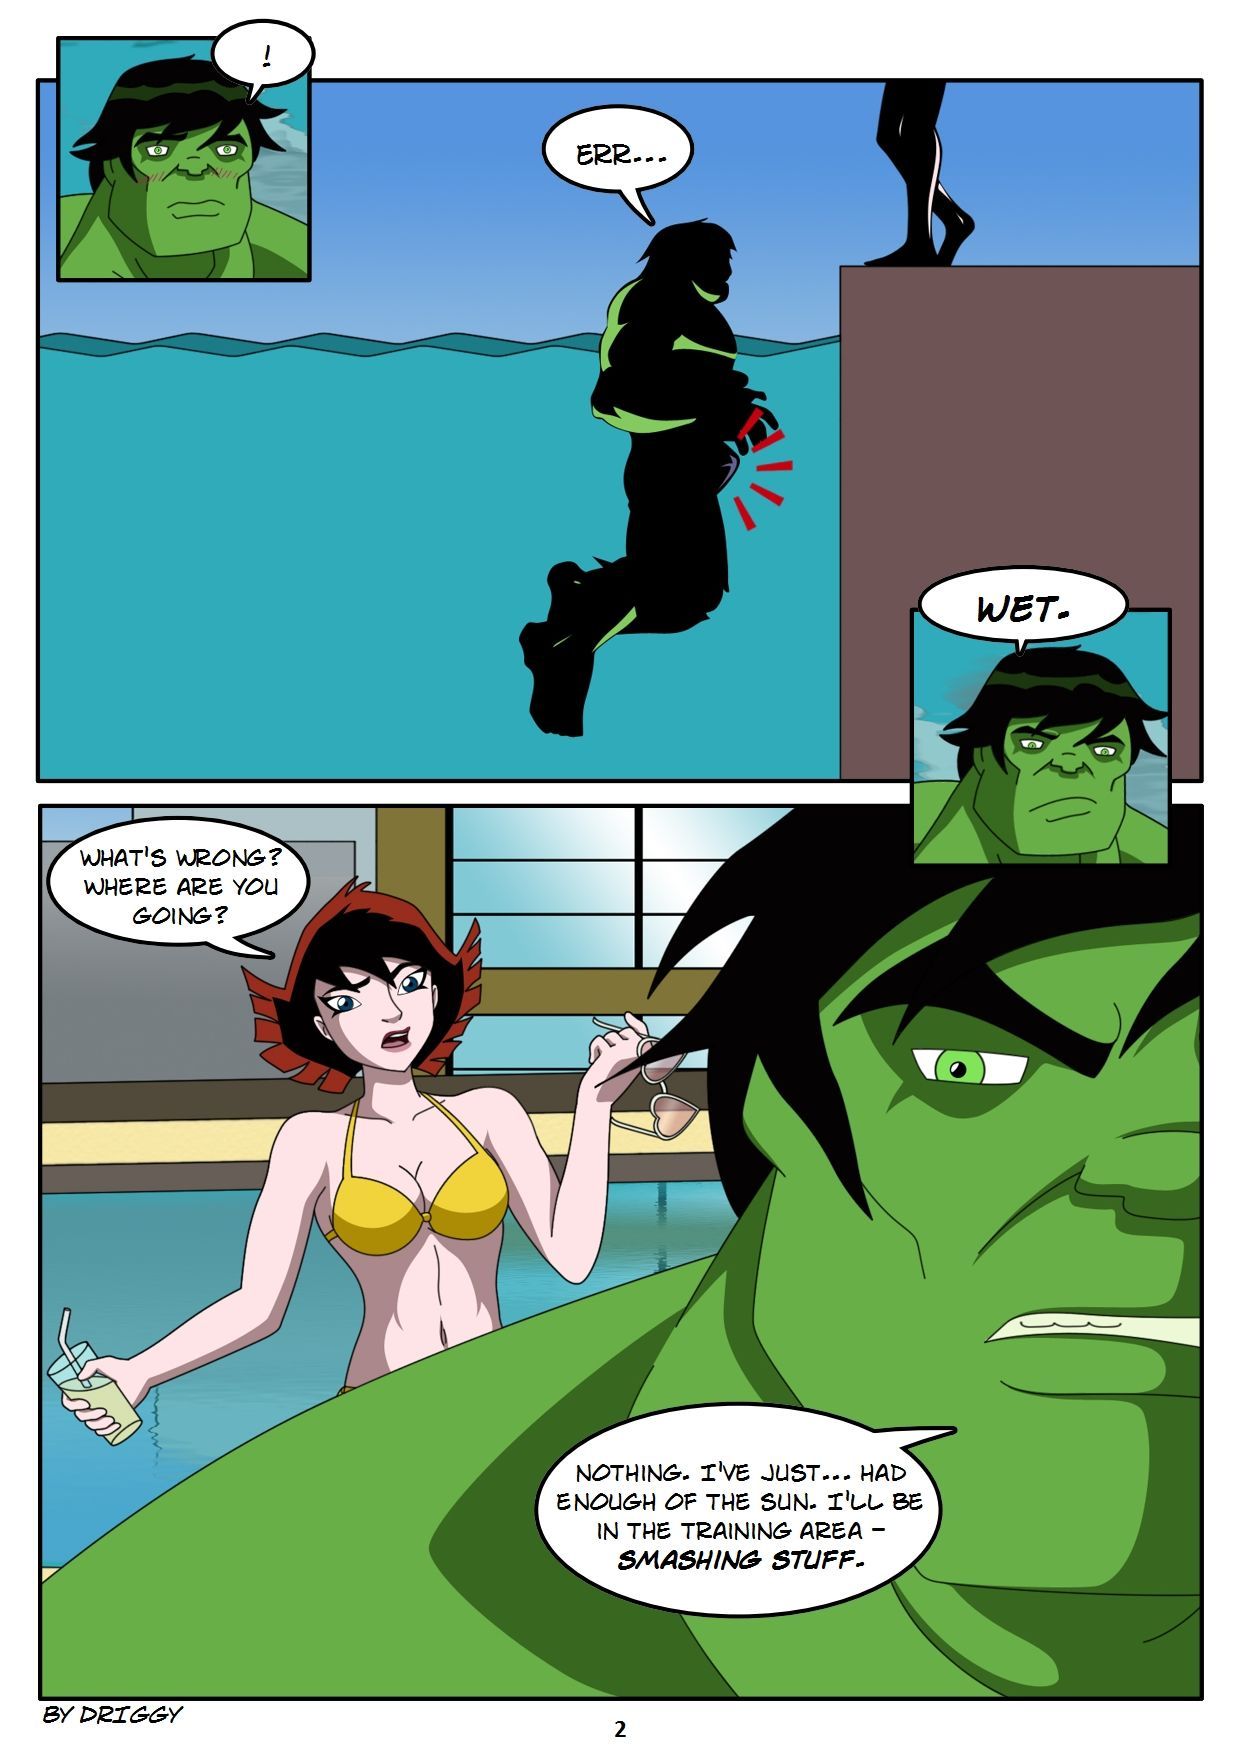 DriggyAvengers a comic by driggy. - Stress Release